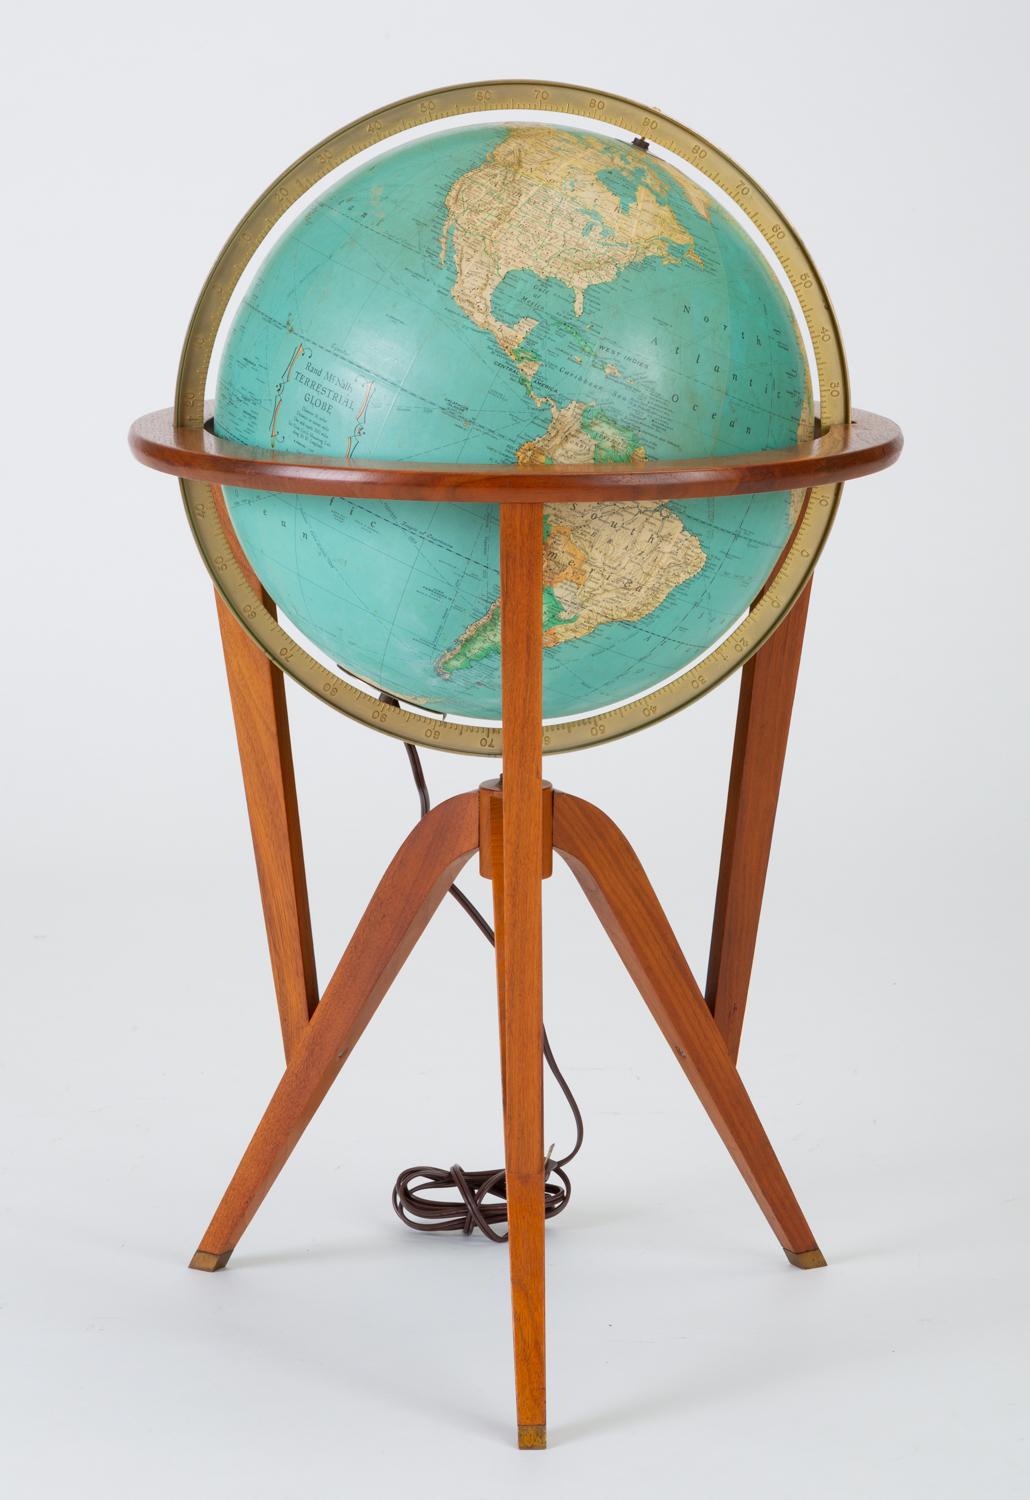 An illuminating globe in a walnut stand designed by Edward Wormley (of Dunbar) for map company Rand McNally. Dubbed the “Cosmopolitan,” the globe has an X-base of four tapered walnut legs with brass feet, and a broad ring of walnut to support the